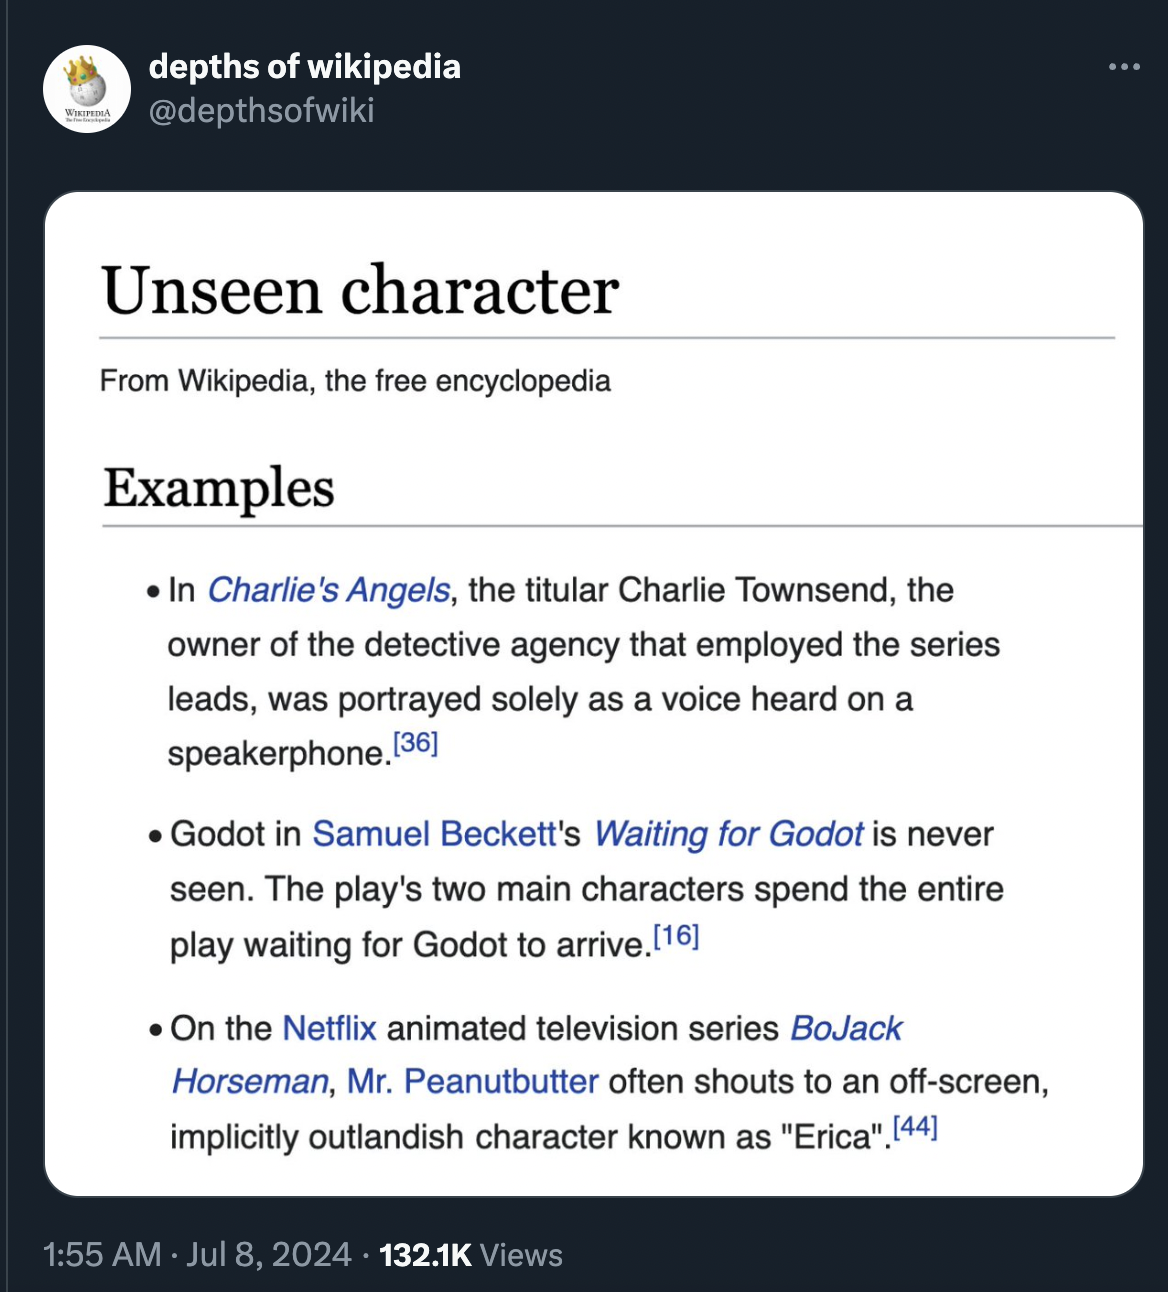 screenshot - depths of wikipedia Unseen character From Wikipedia, the free encyclopedia Examples In Charlie's Angels, the titular Charlie Townsend, the owner of the detective agency that employed the series leads, was portrayed solely as a voice heard on 